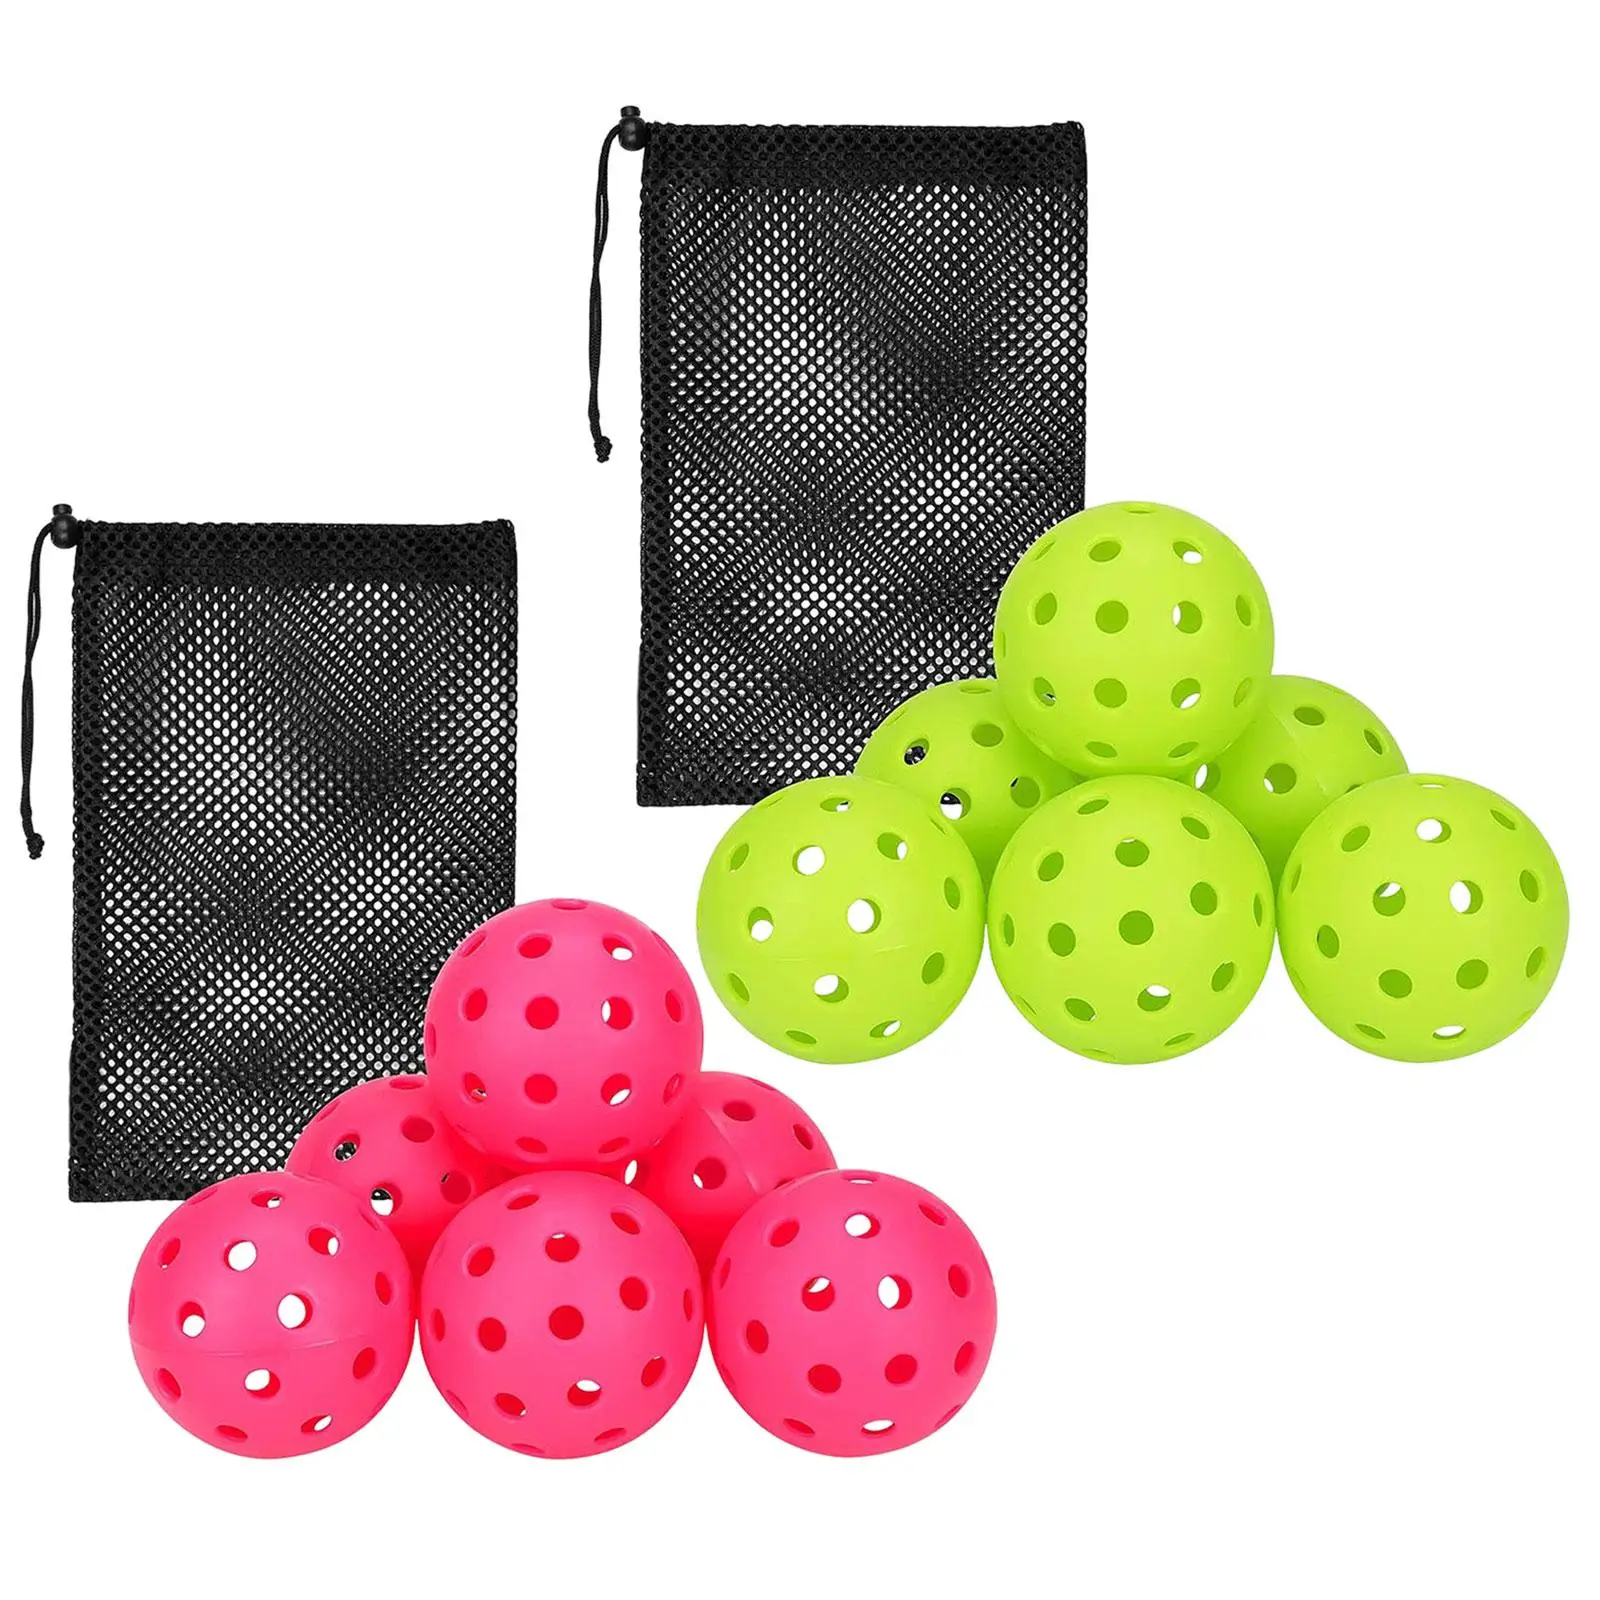 6 Pieces 40 Holes Pickleball Balls Adult Sporting Goods Professional Official Size Ball for Outdoor Courts Tournament Play